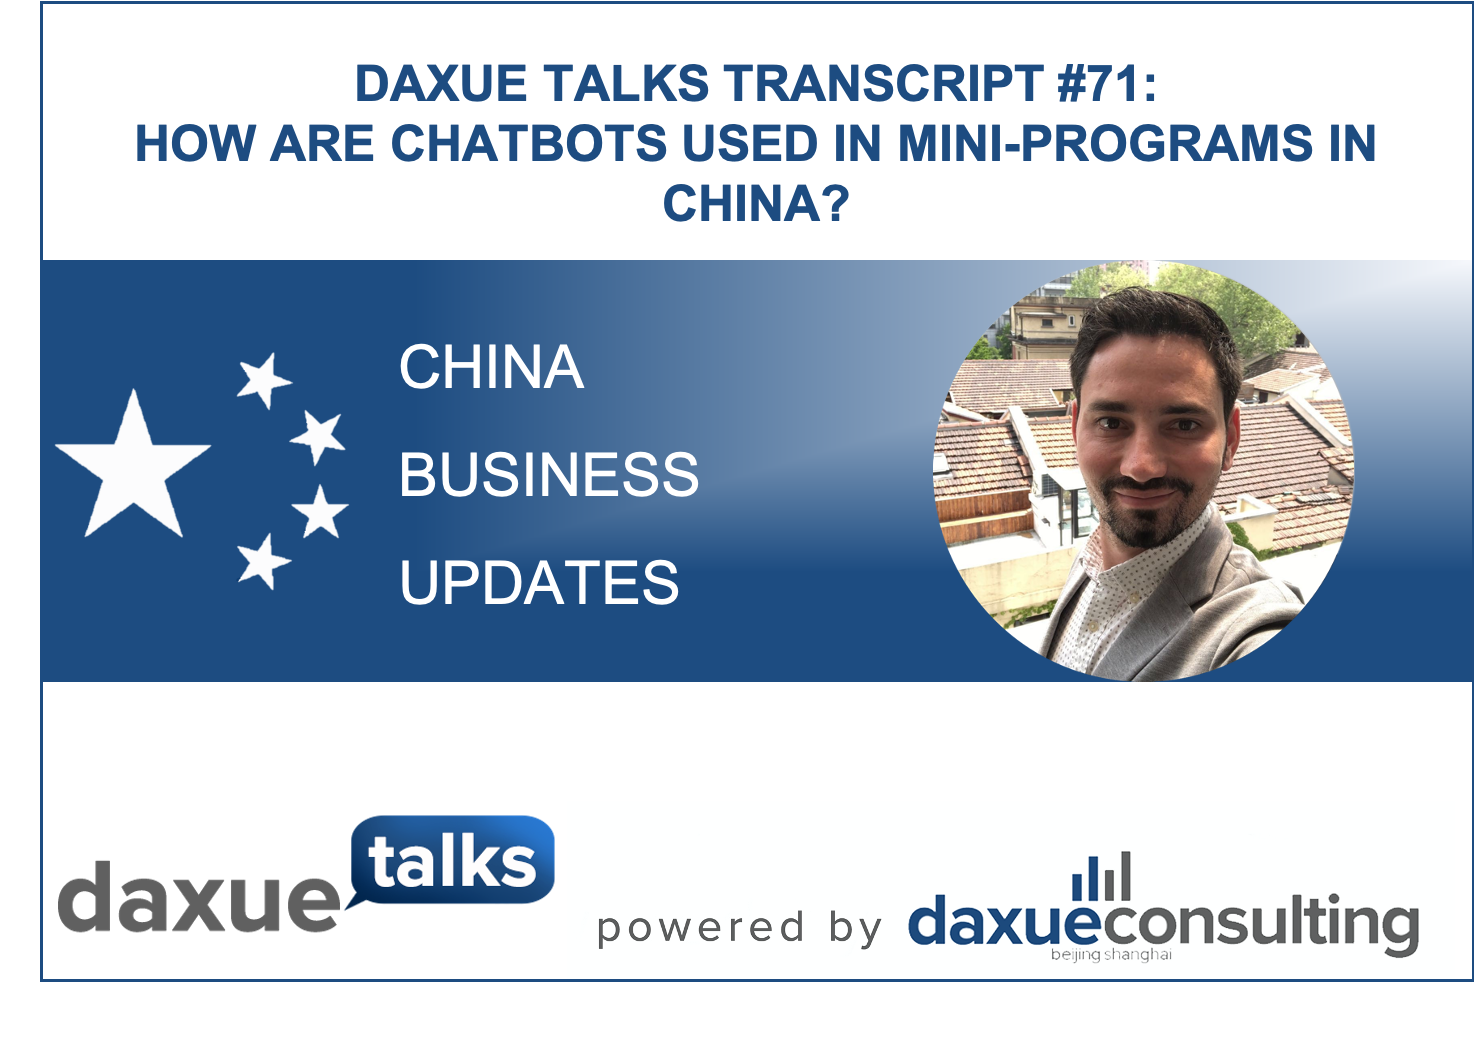 Daxue Talks transcript #71: How are chatbots used in mini-programs in China?